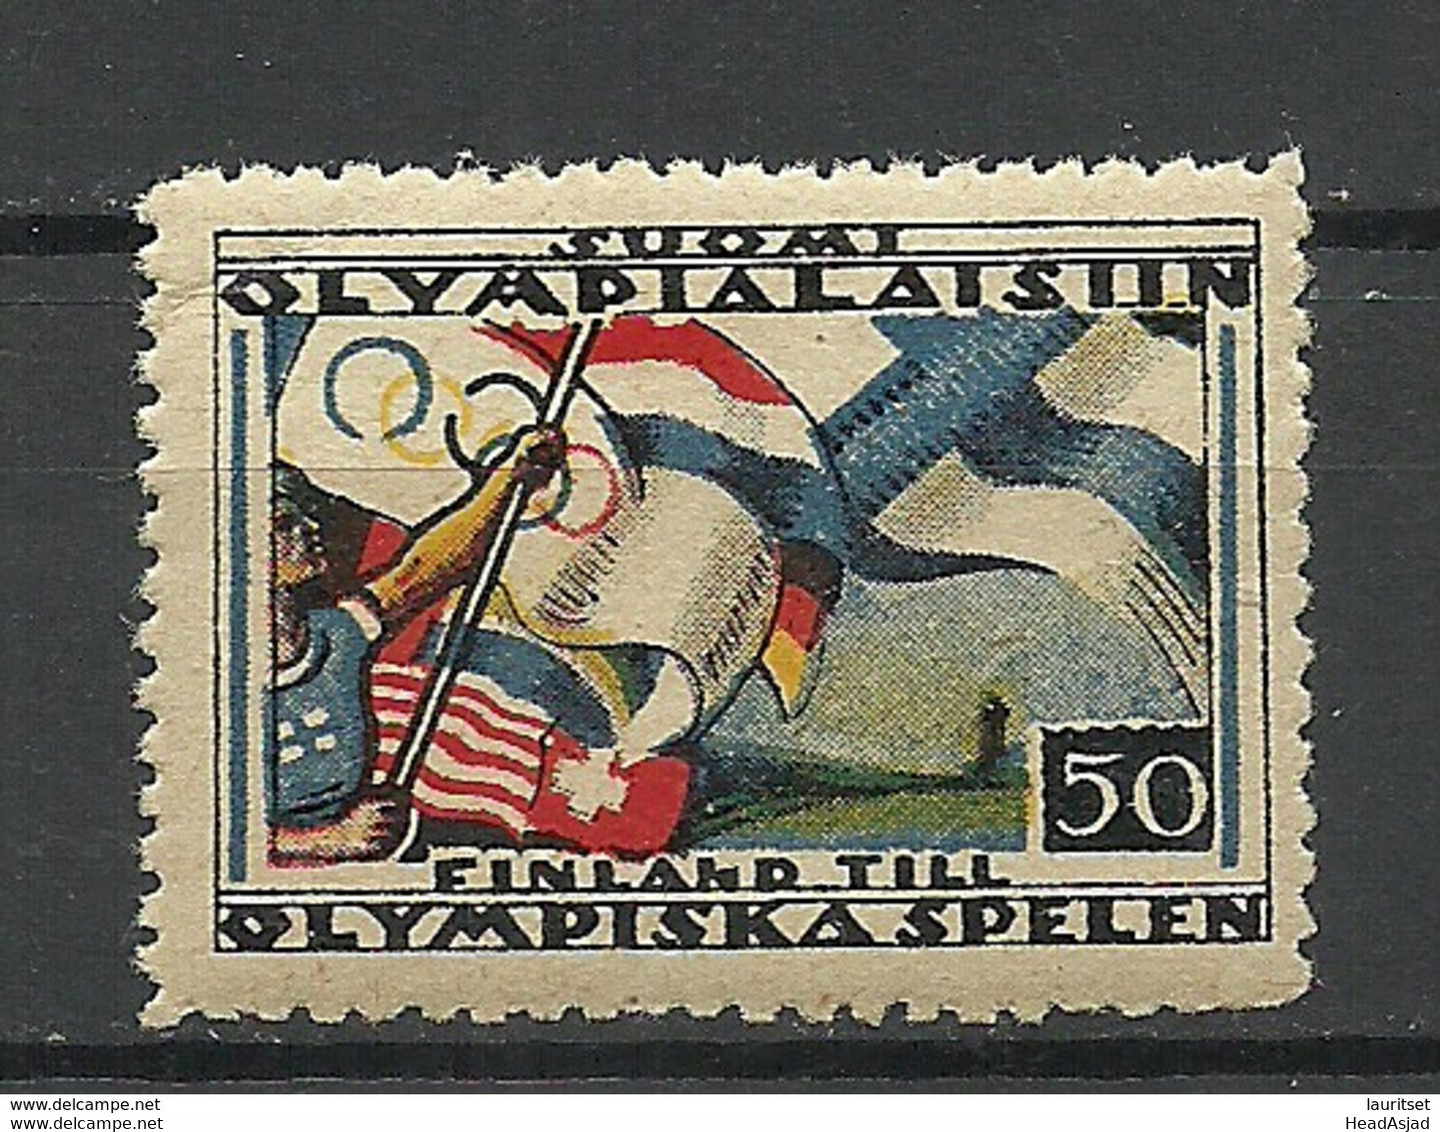 FINLAND 1928 Finland To Olympic Games ( Amsterdam ) MNH RRR - Ete 1928: Amsterdam